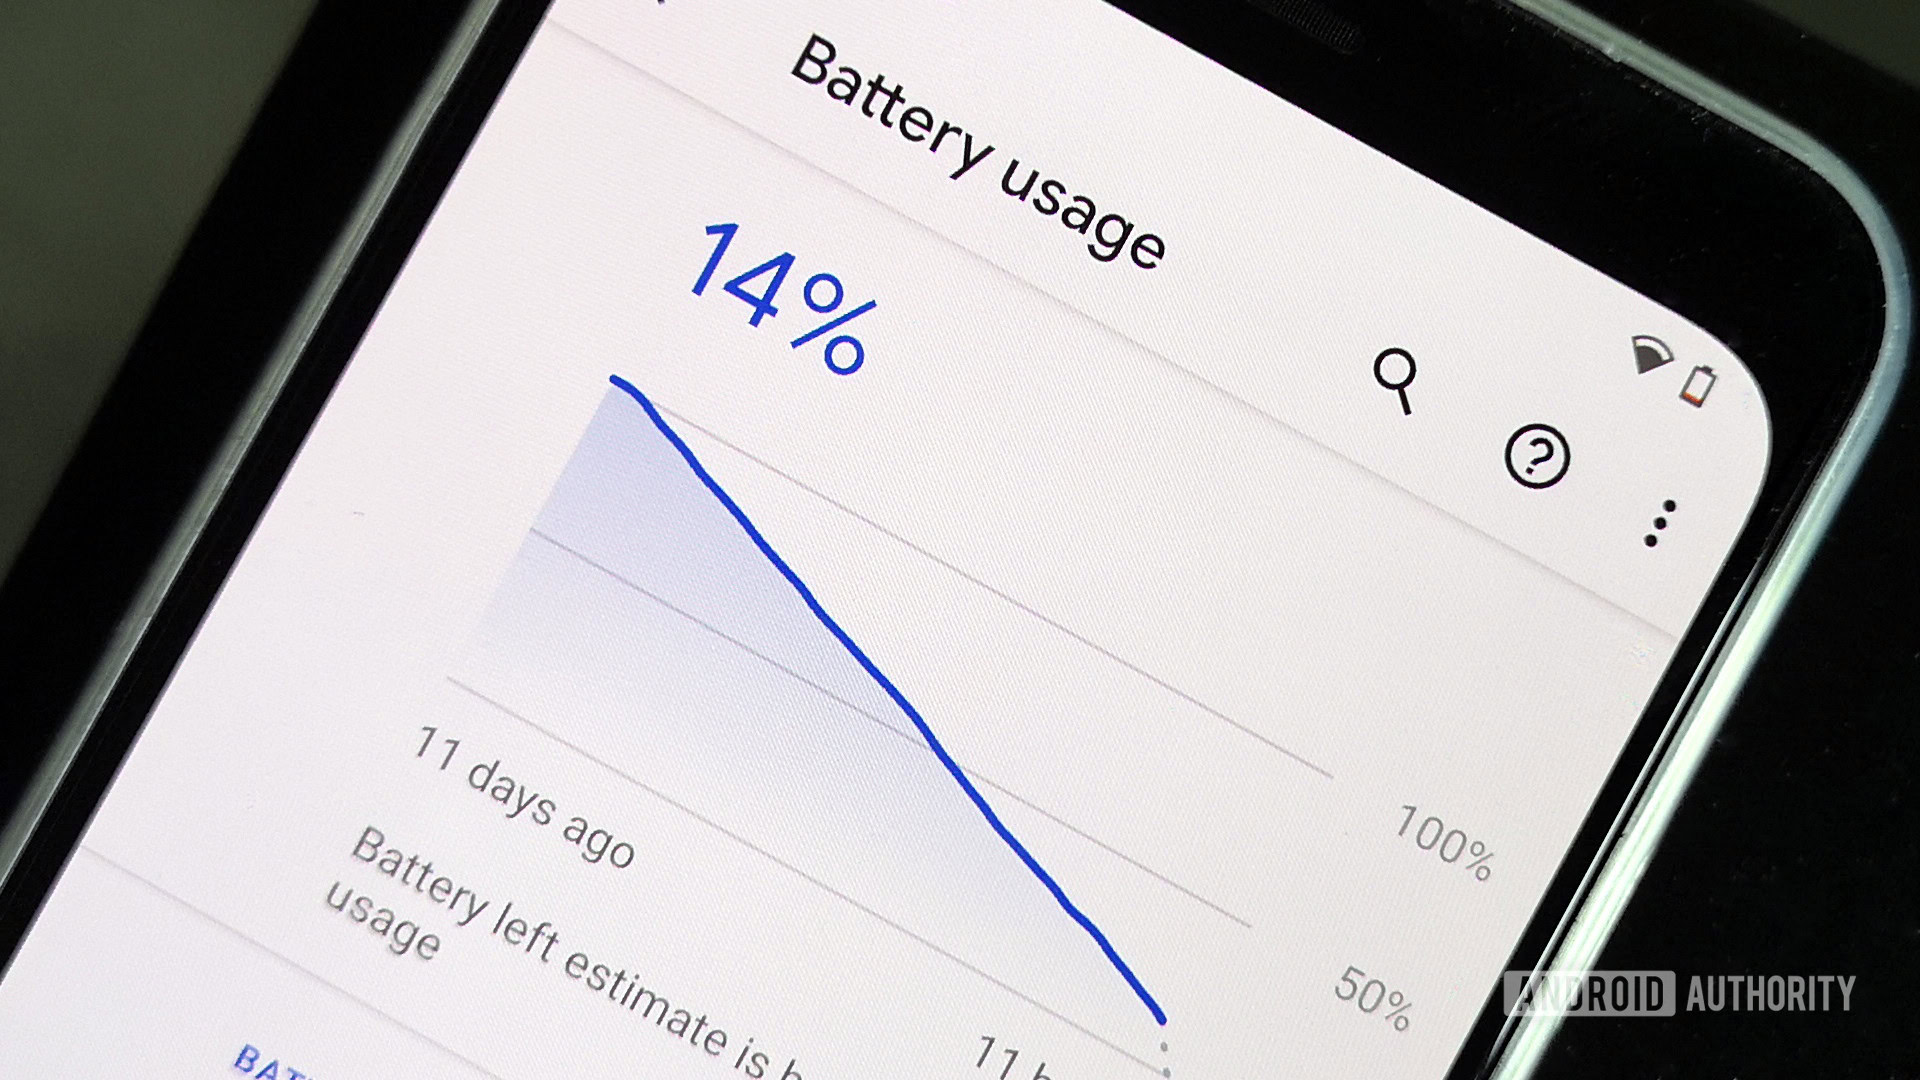 battery side feature how much battery life remaining